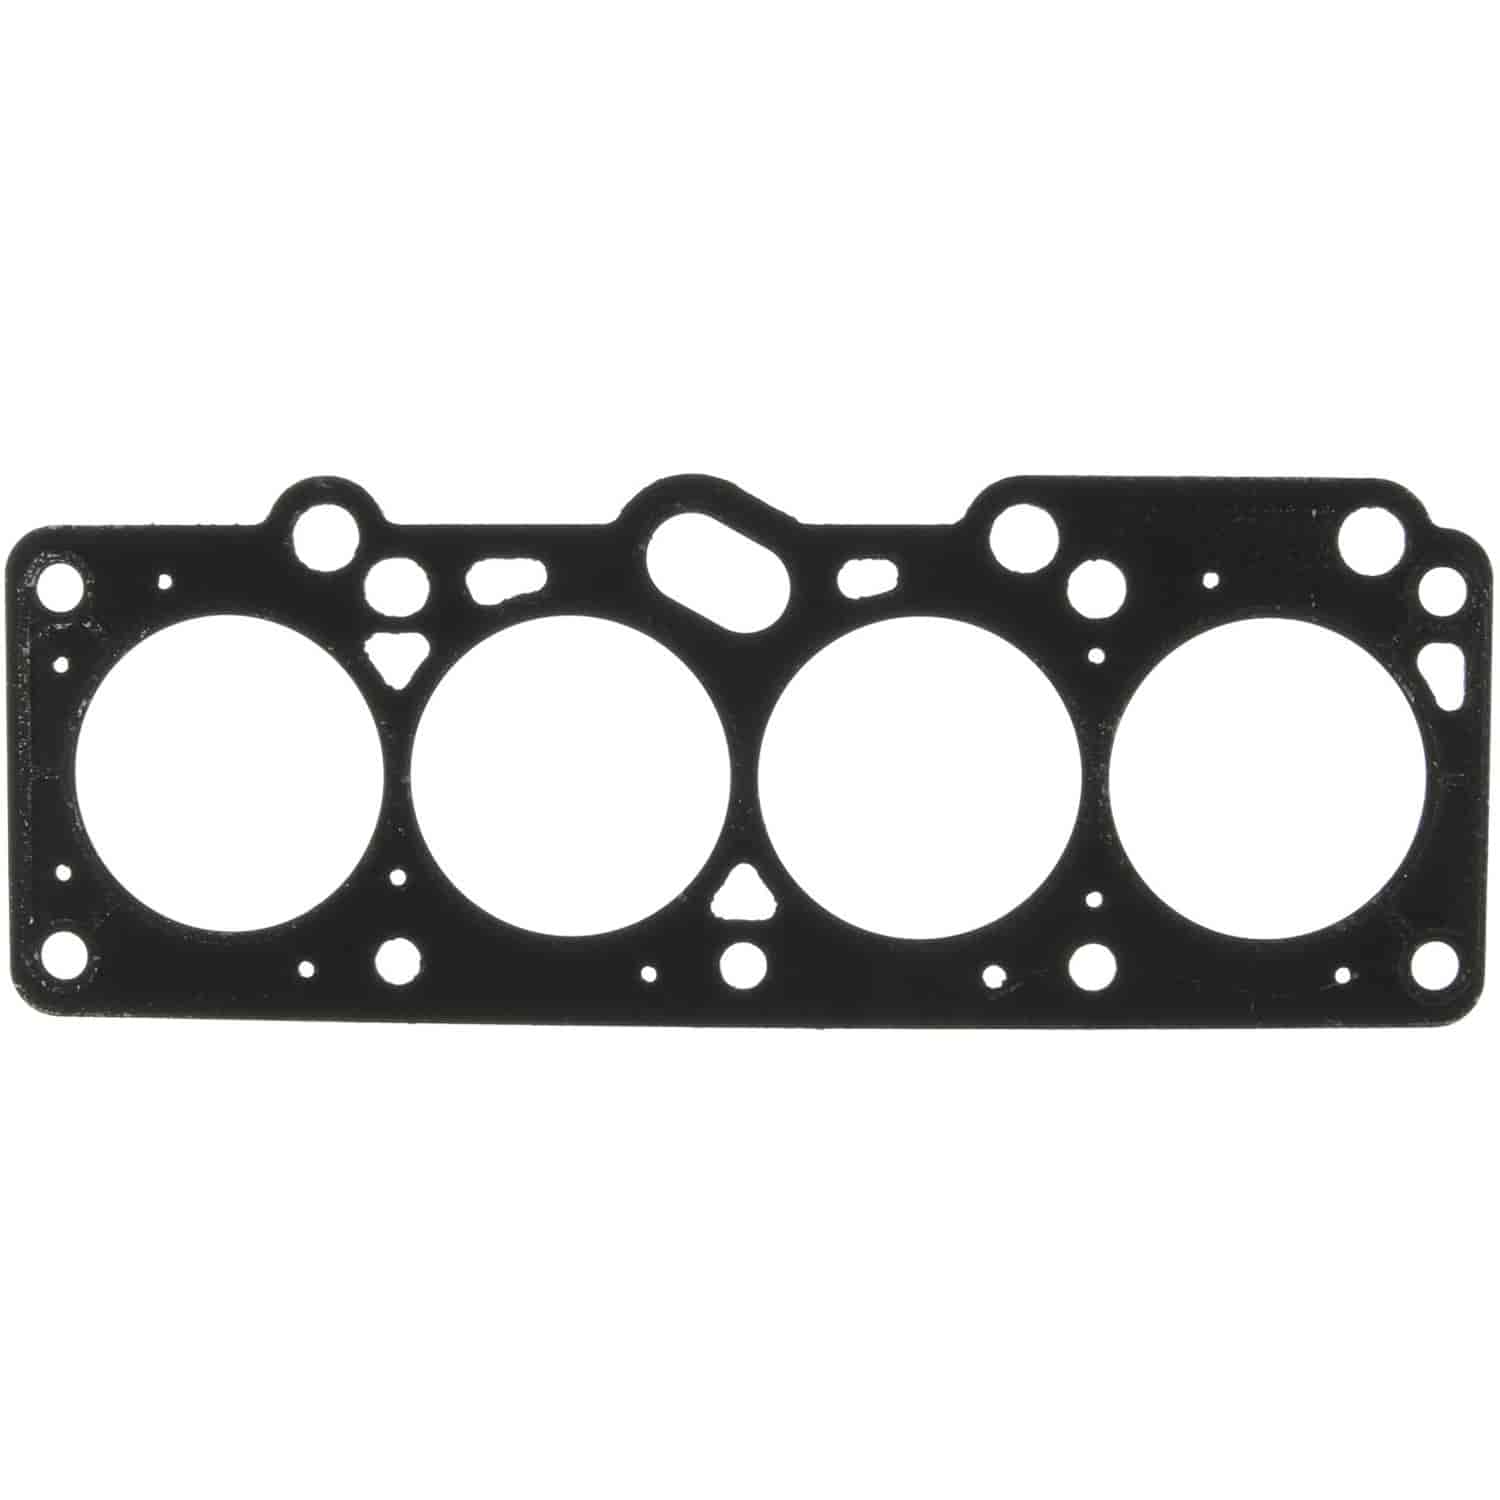 Cylinder Head Gasket Ford-Pass Merc 116 1.9L Escort Tracer 91-95